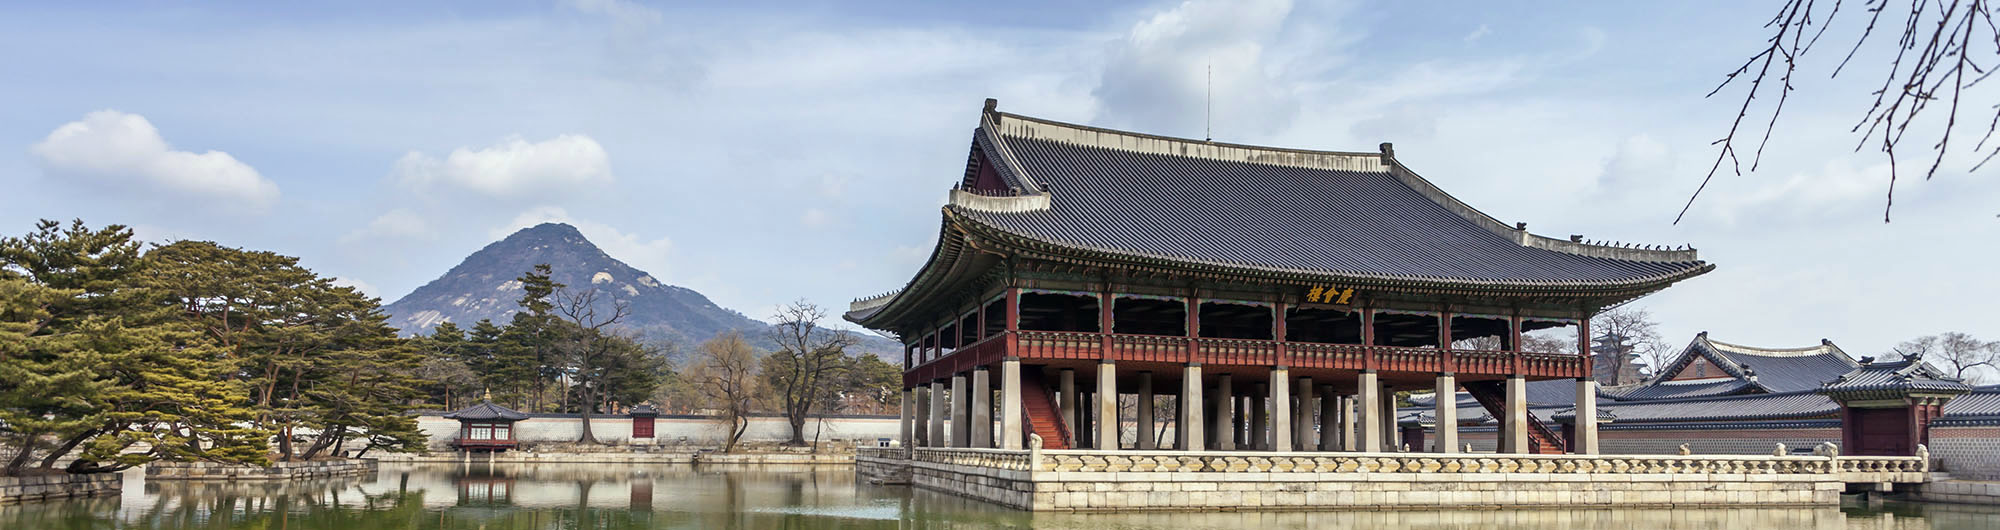 Search and compare cheap flights from Hong Kong to Seoul